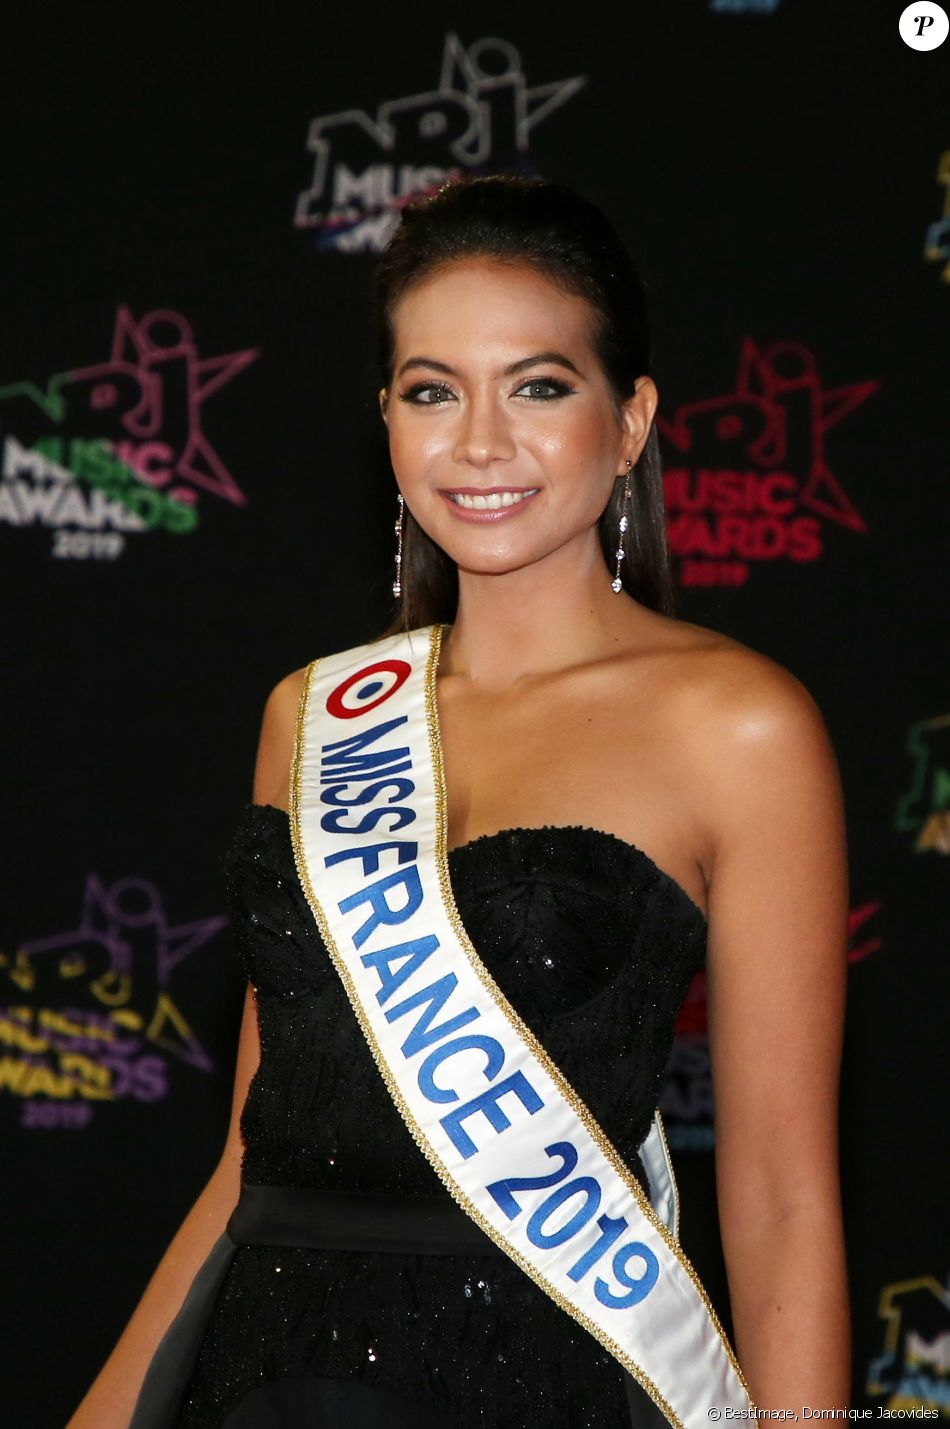 https://static1.purepeople.com/articles/9/36/31/49/@/5230847-vaimalama-chaves-miss-france-2019-21e-950x0-3.jpg